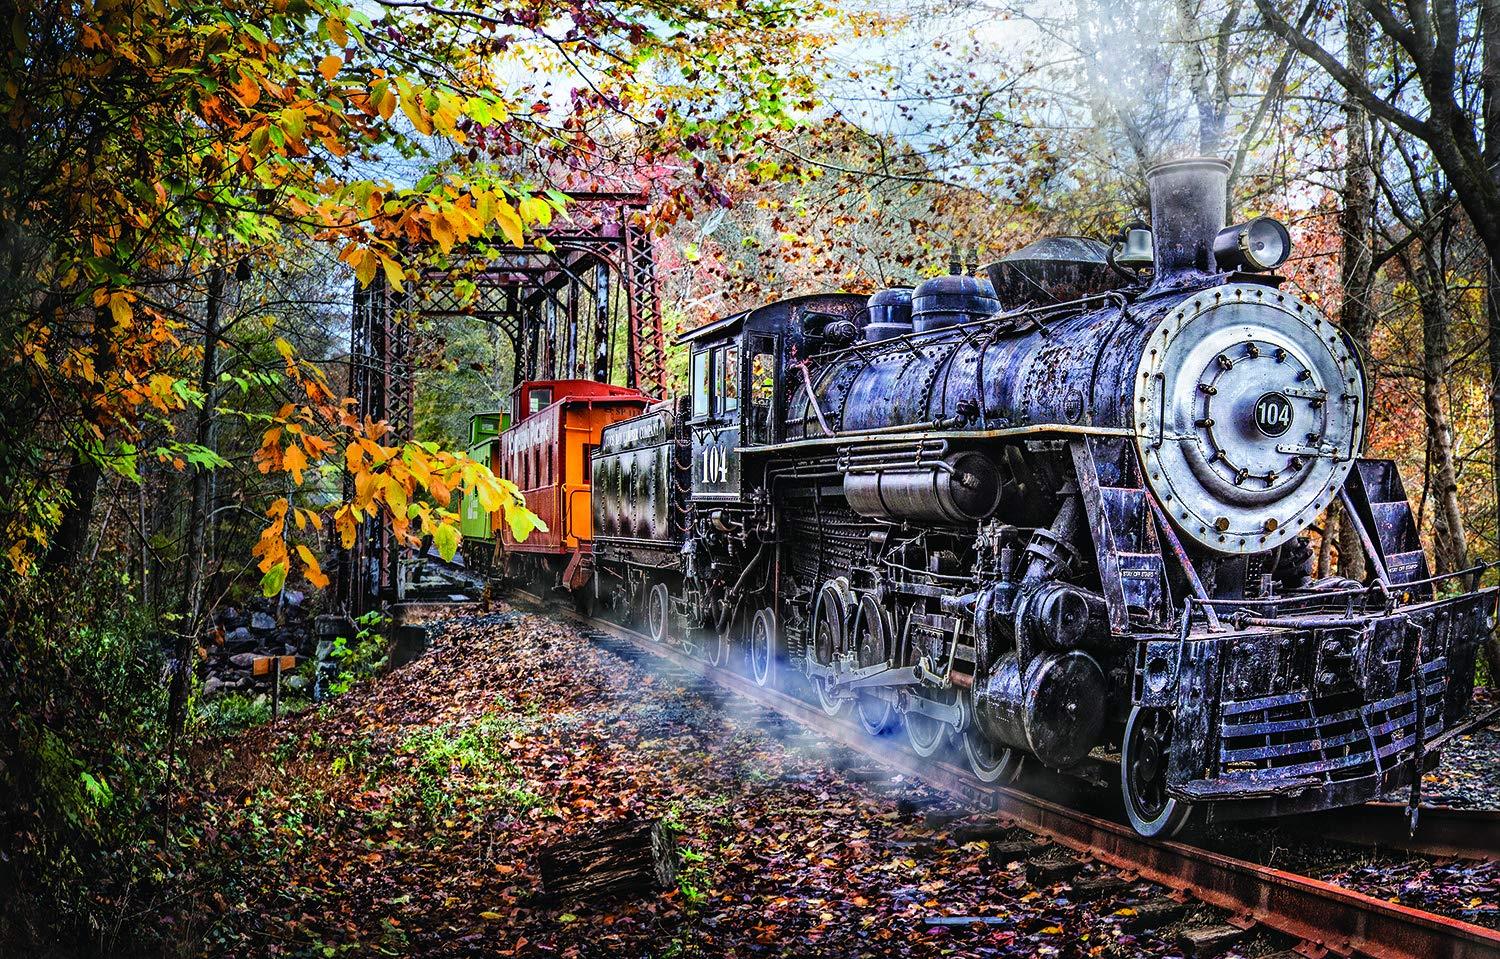 Sunsout Train's Coming, Celebrate Life Gallery Jigsaw Puzzle (1000 Pieces)